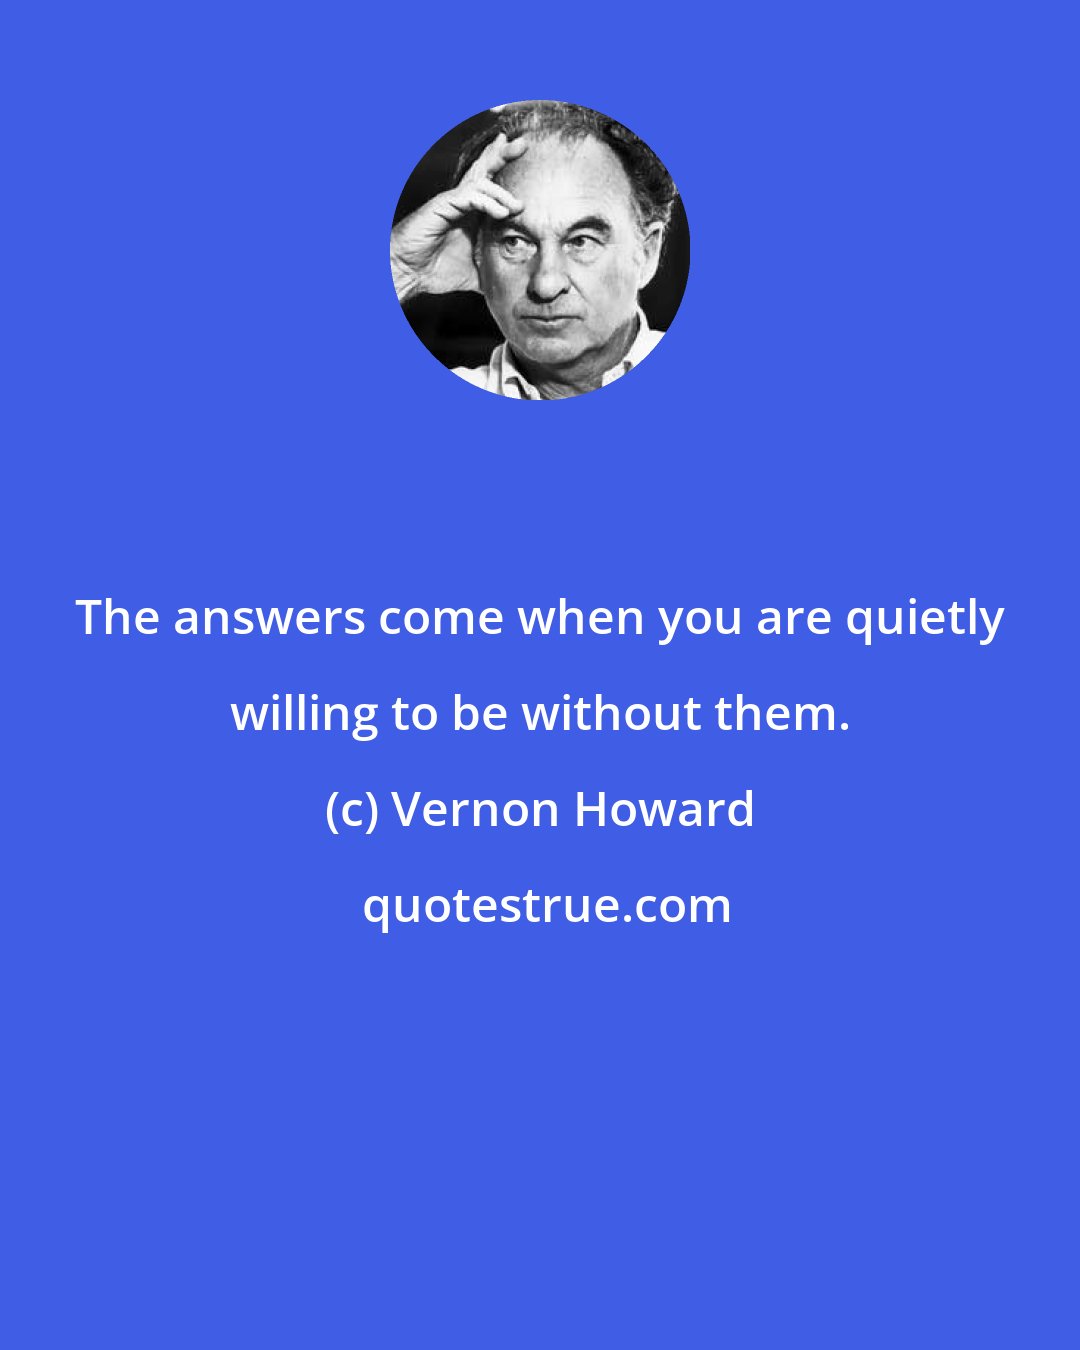 Vernon Howard: The answers come when you are quietly willing to be without them.